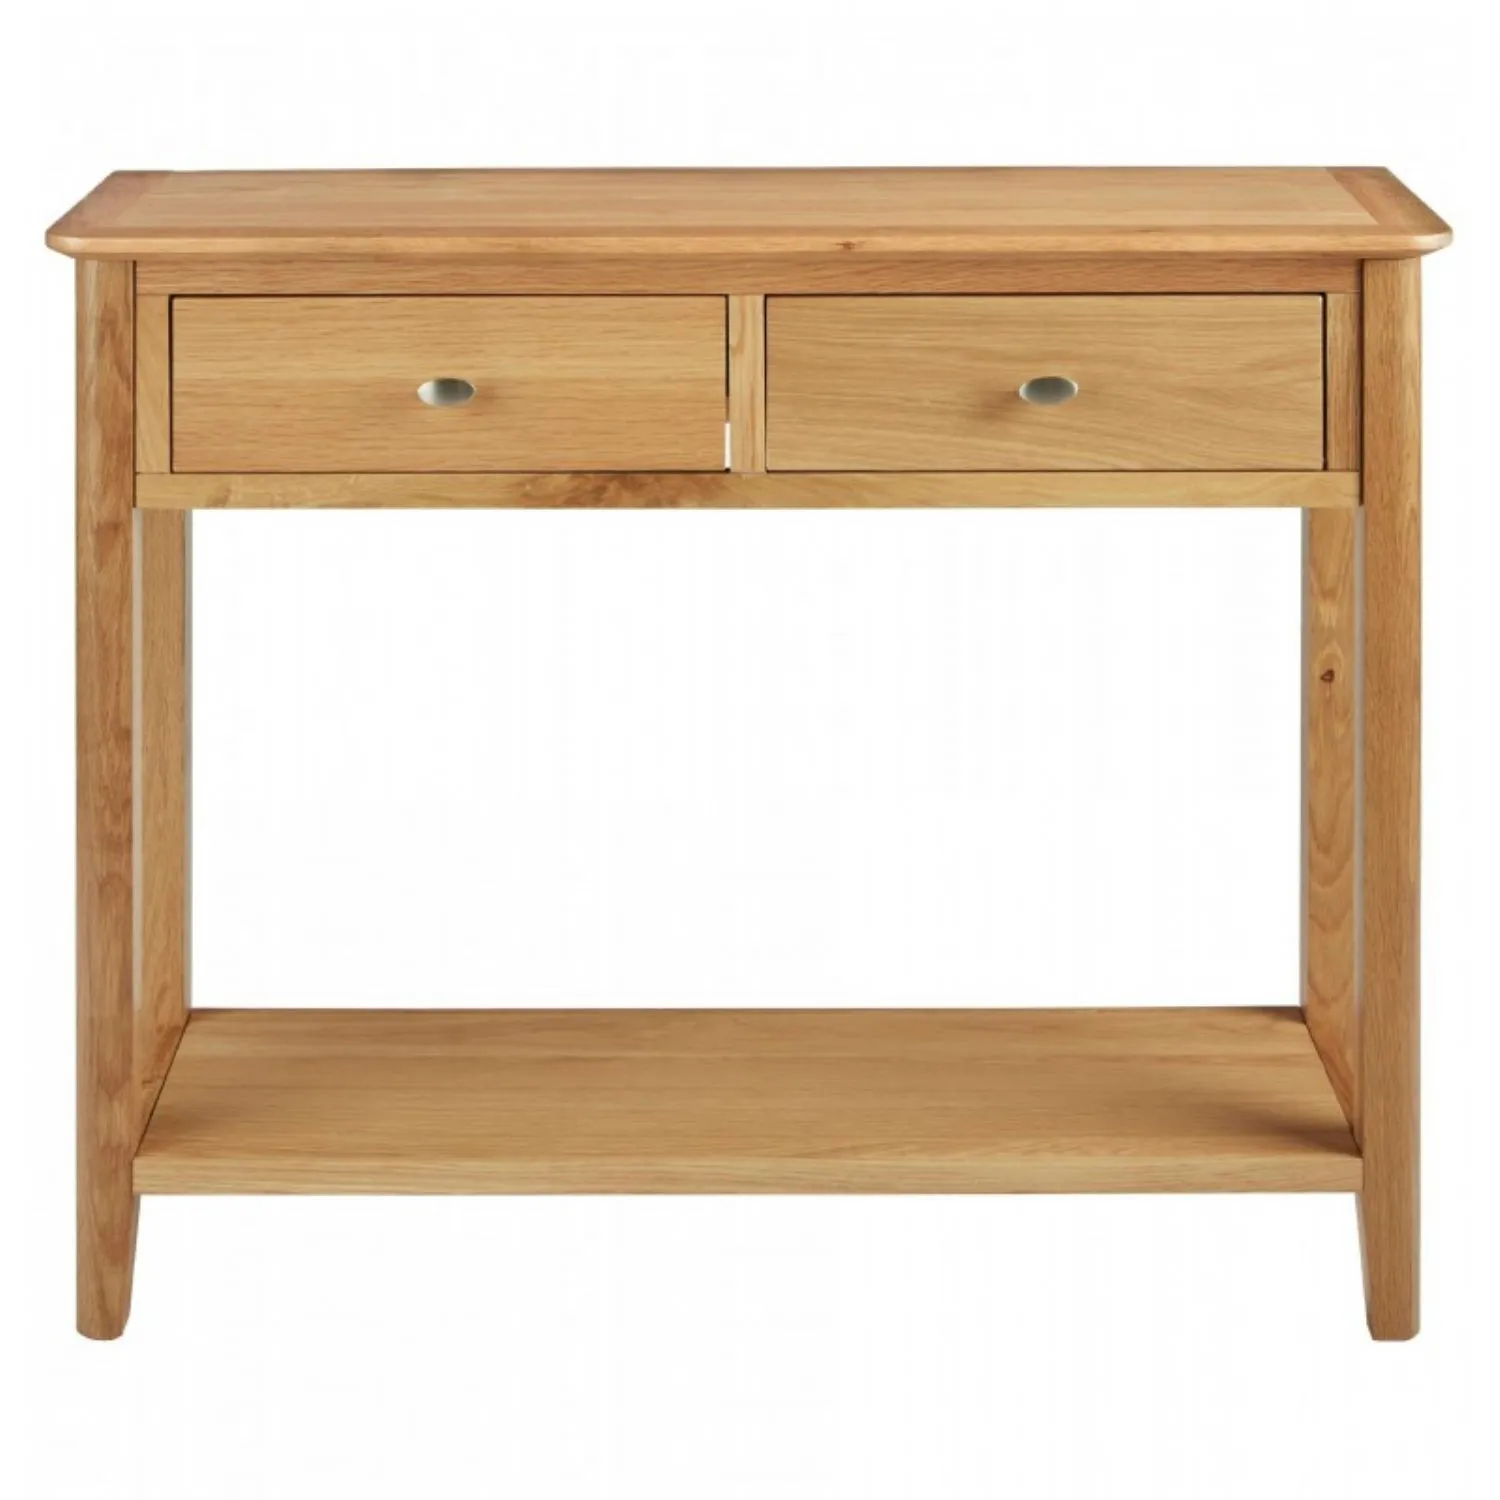 Solid Oak 100cm Console Table with 2 Drawers